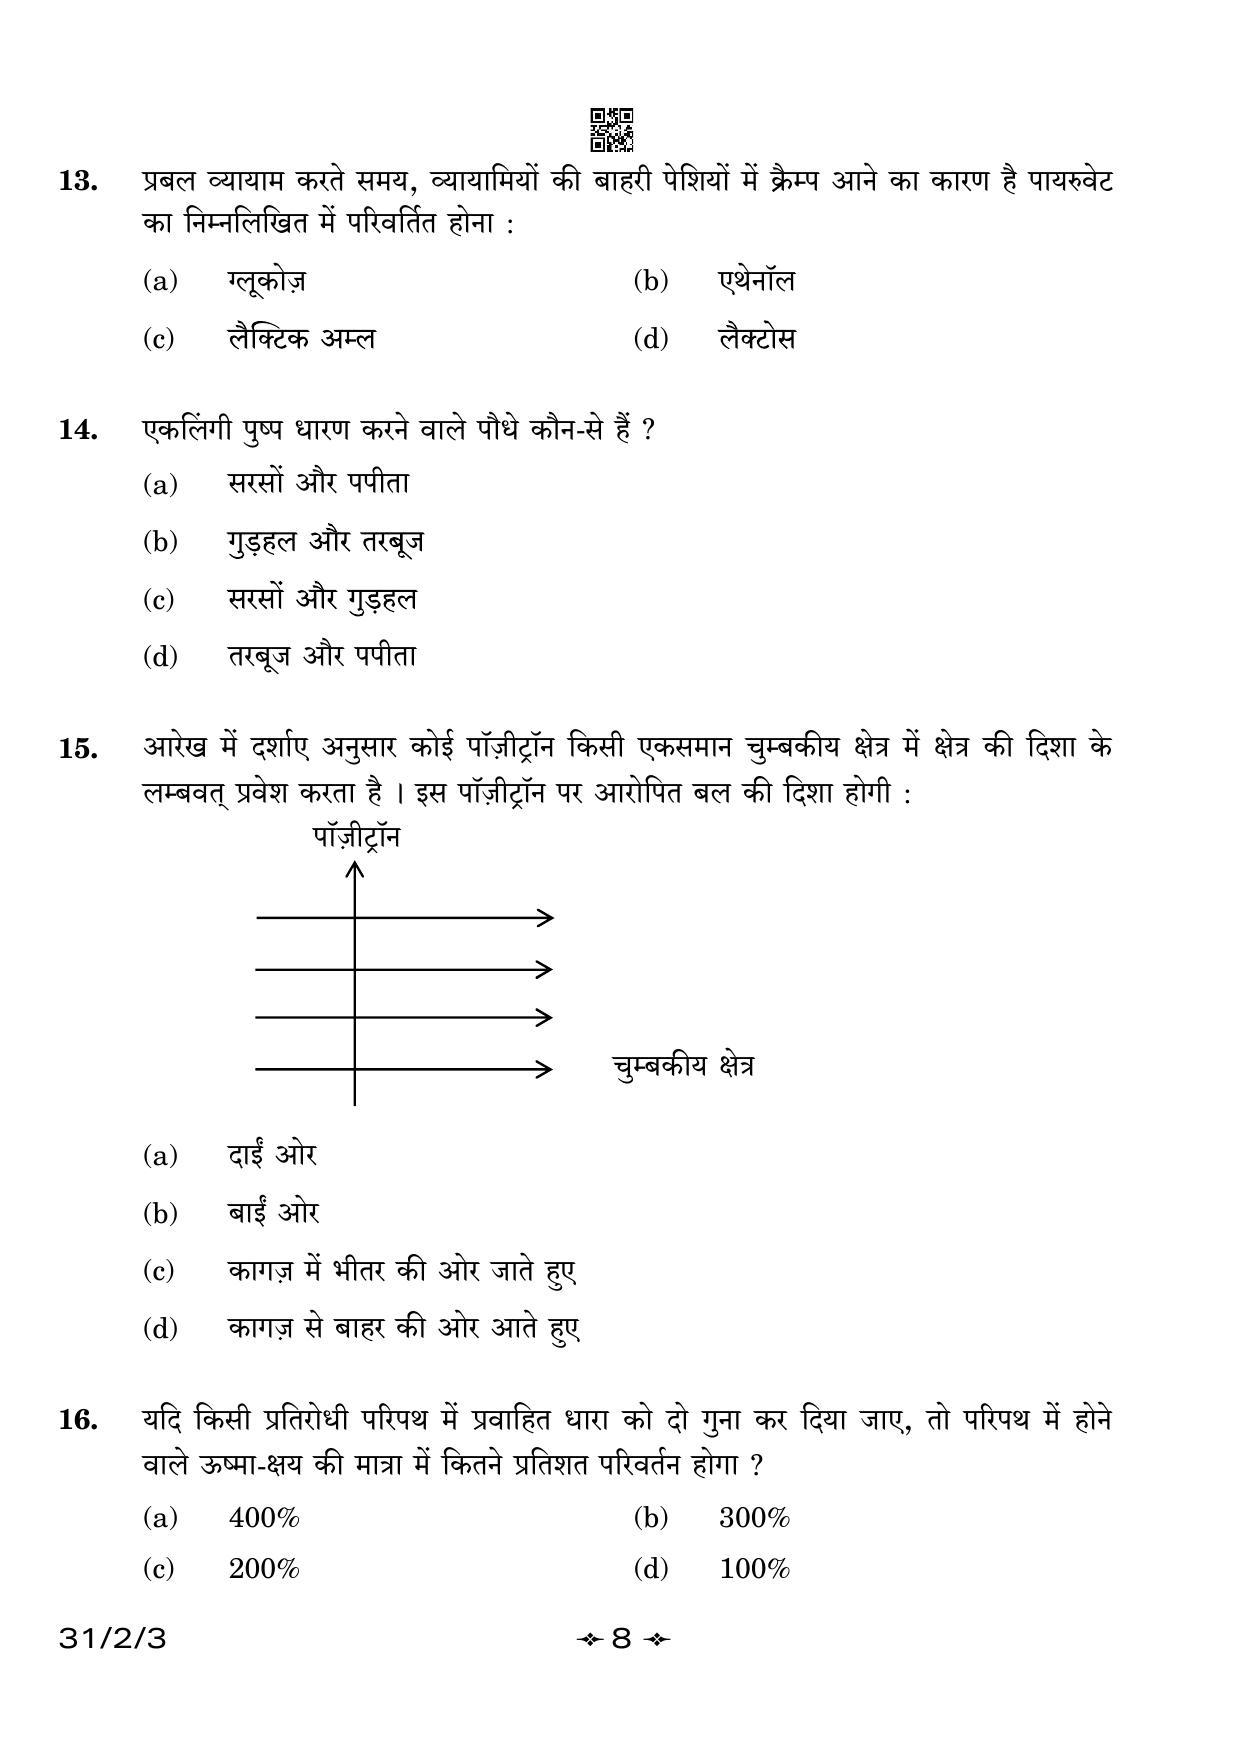 CBSE Class 10 31-2-3 Science 2023 Question Paper - Page 8